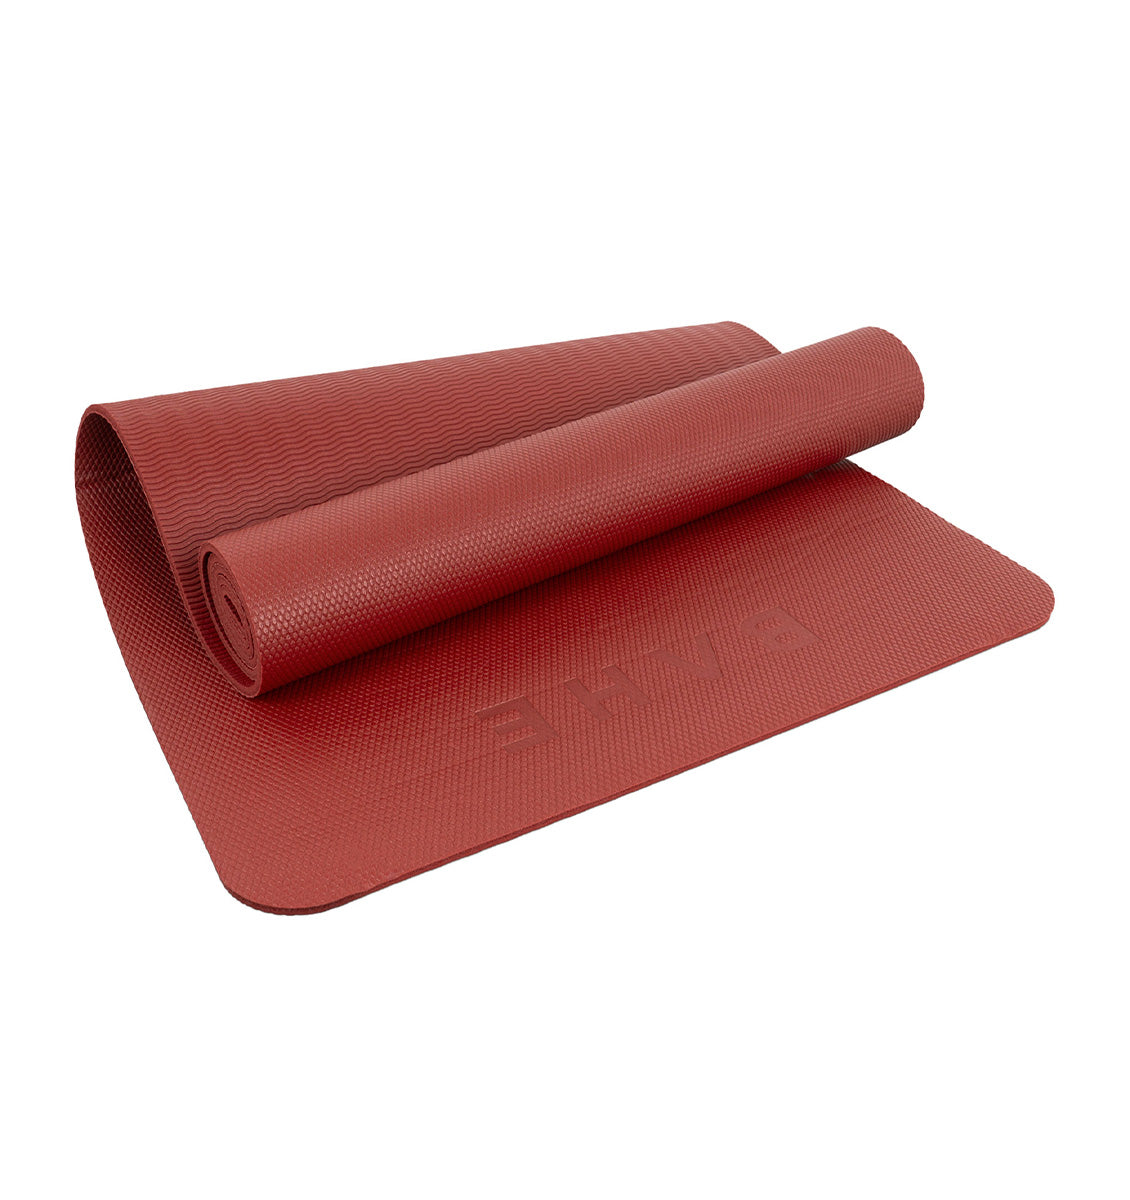 BAHE Prime Support Yoga Mat - 6mm - Red Dust - 2